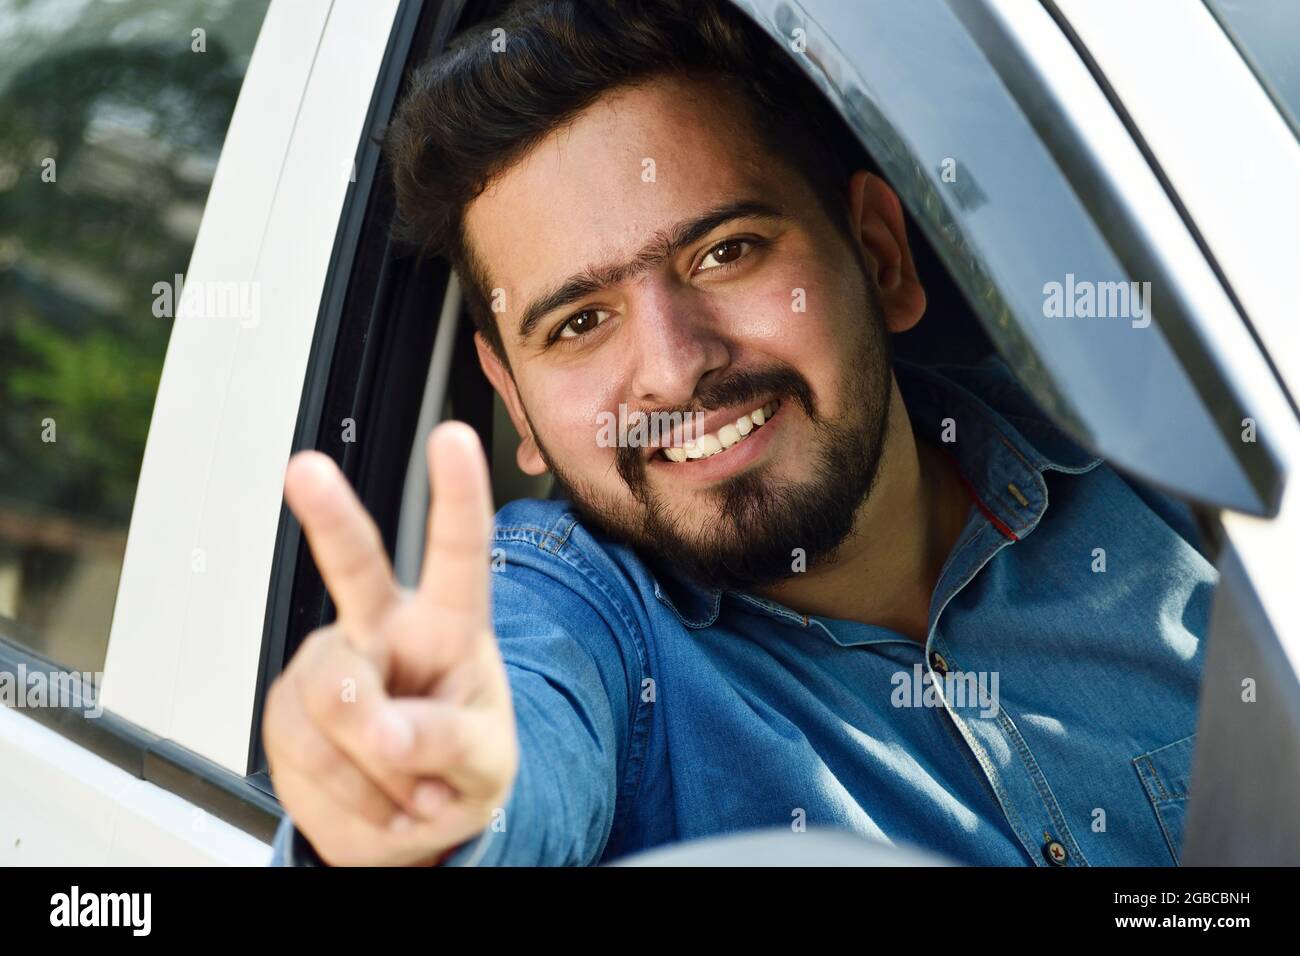 Indian driver showing victory sign from car, car loan concept Stock Photo